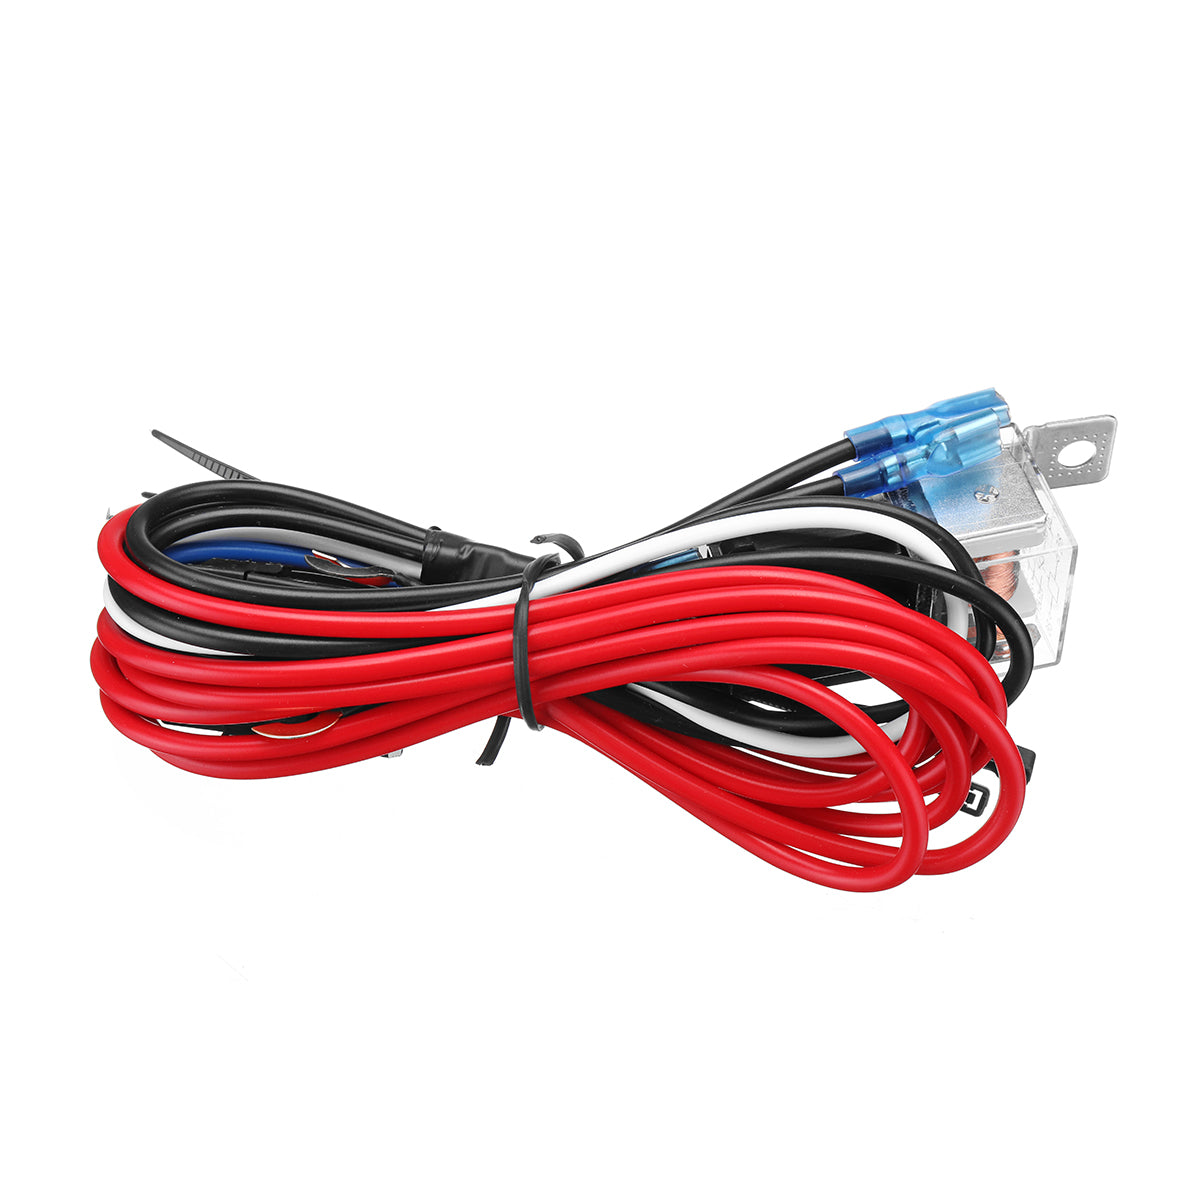 12V Electric Horn Relay Wiring Harness Kit For Car Truck Grille Mount Blast Tone Horns - Auto GoShop